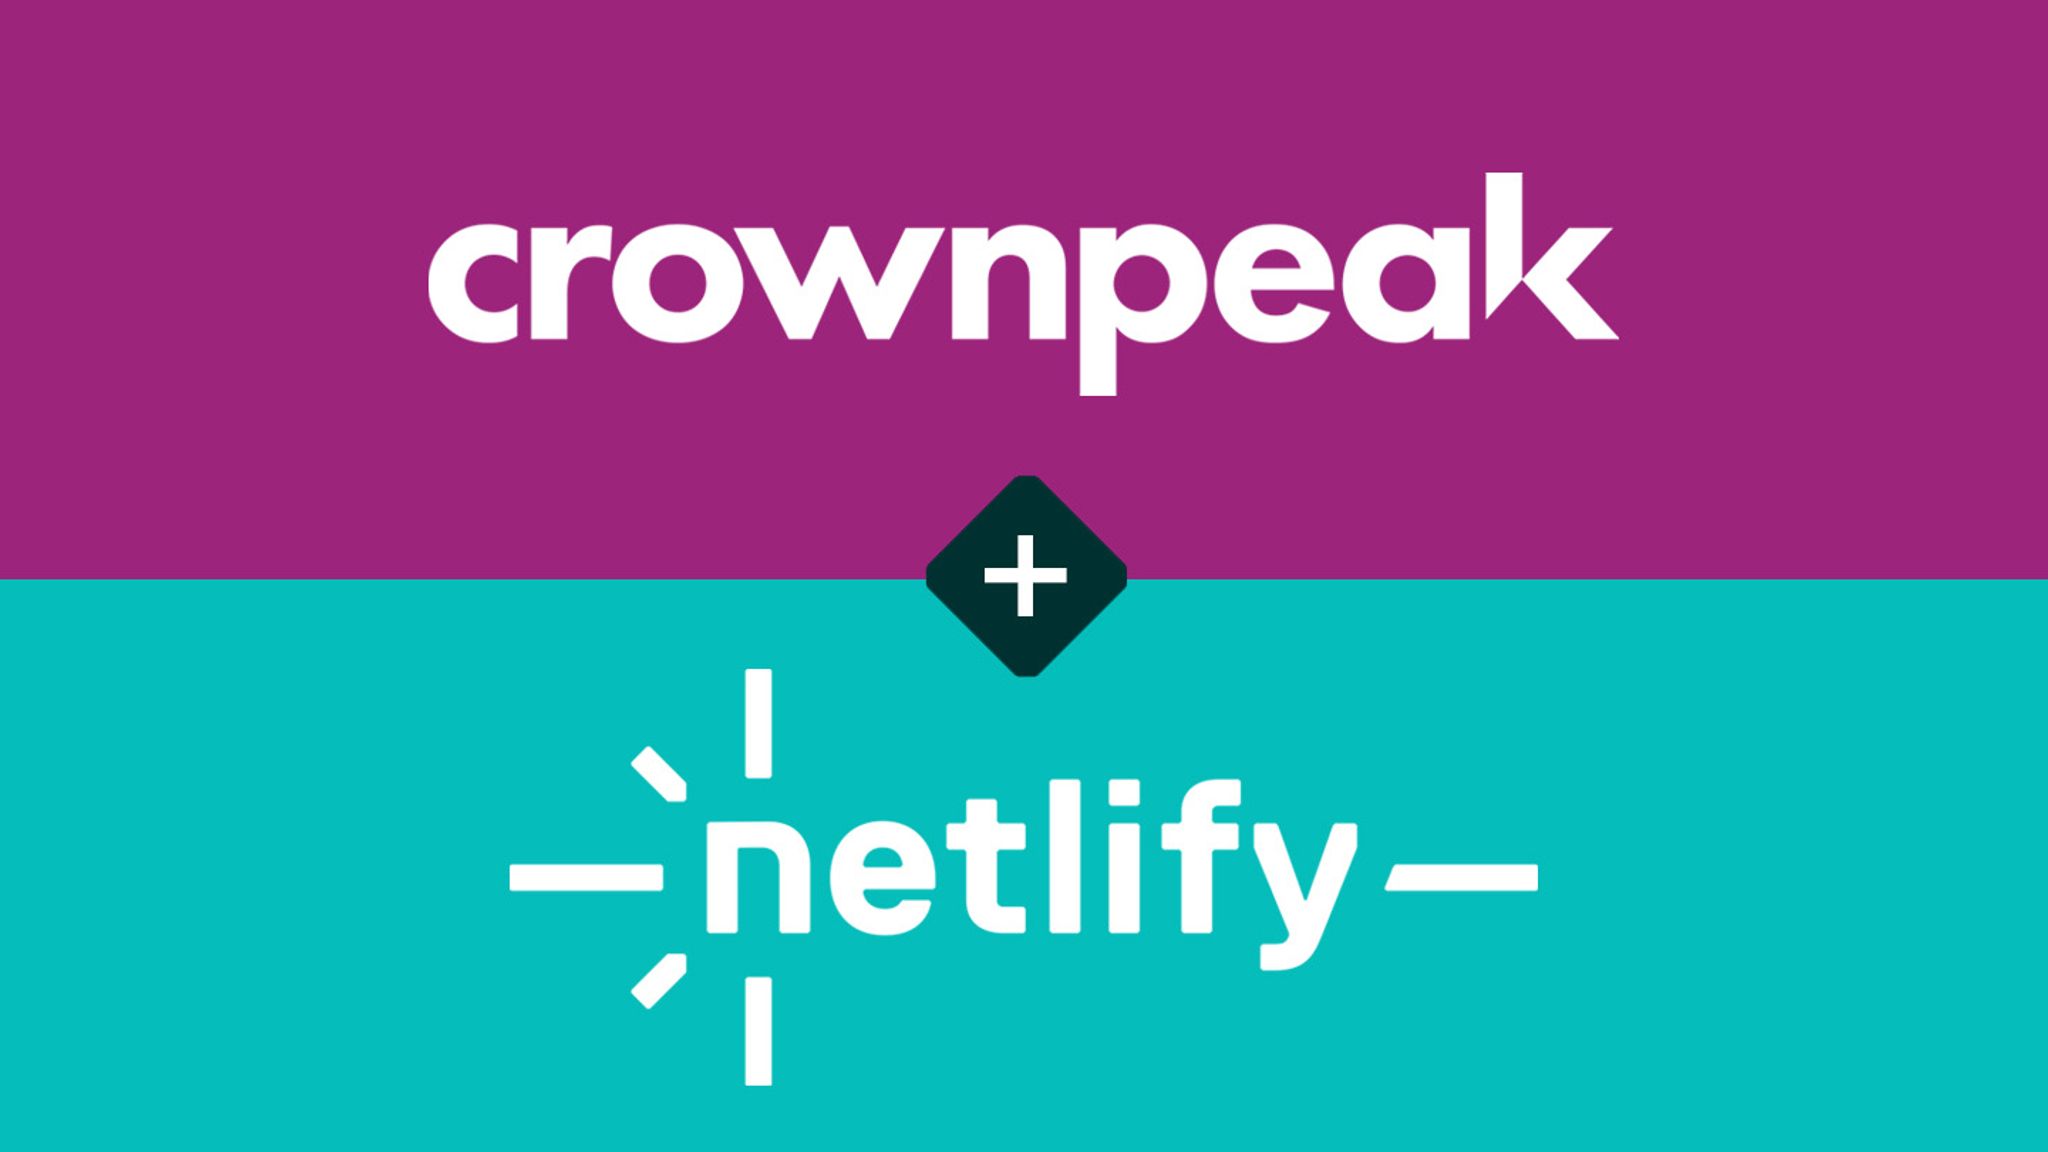 Crownpeak logo and Netlify logo stacked on colored background